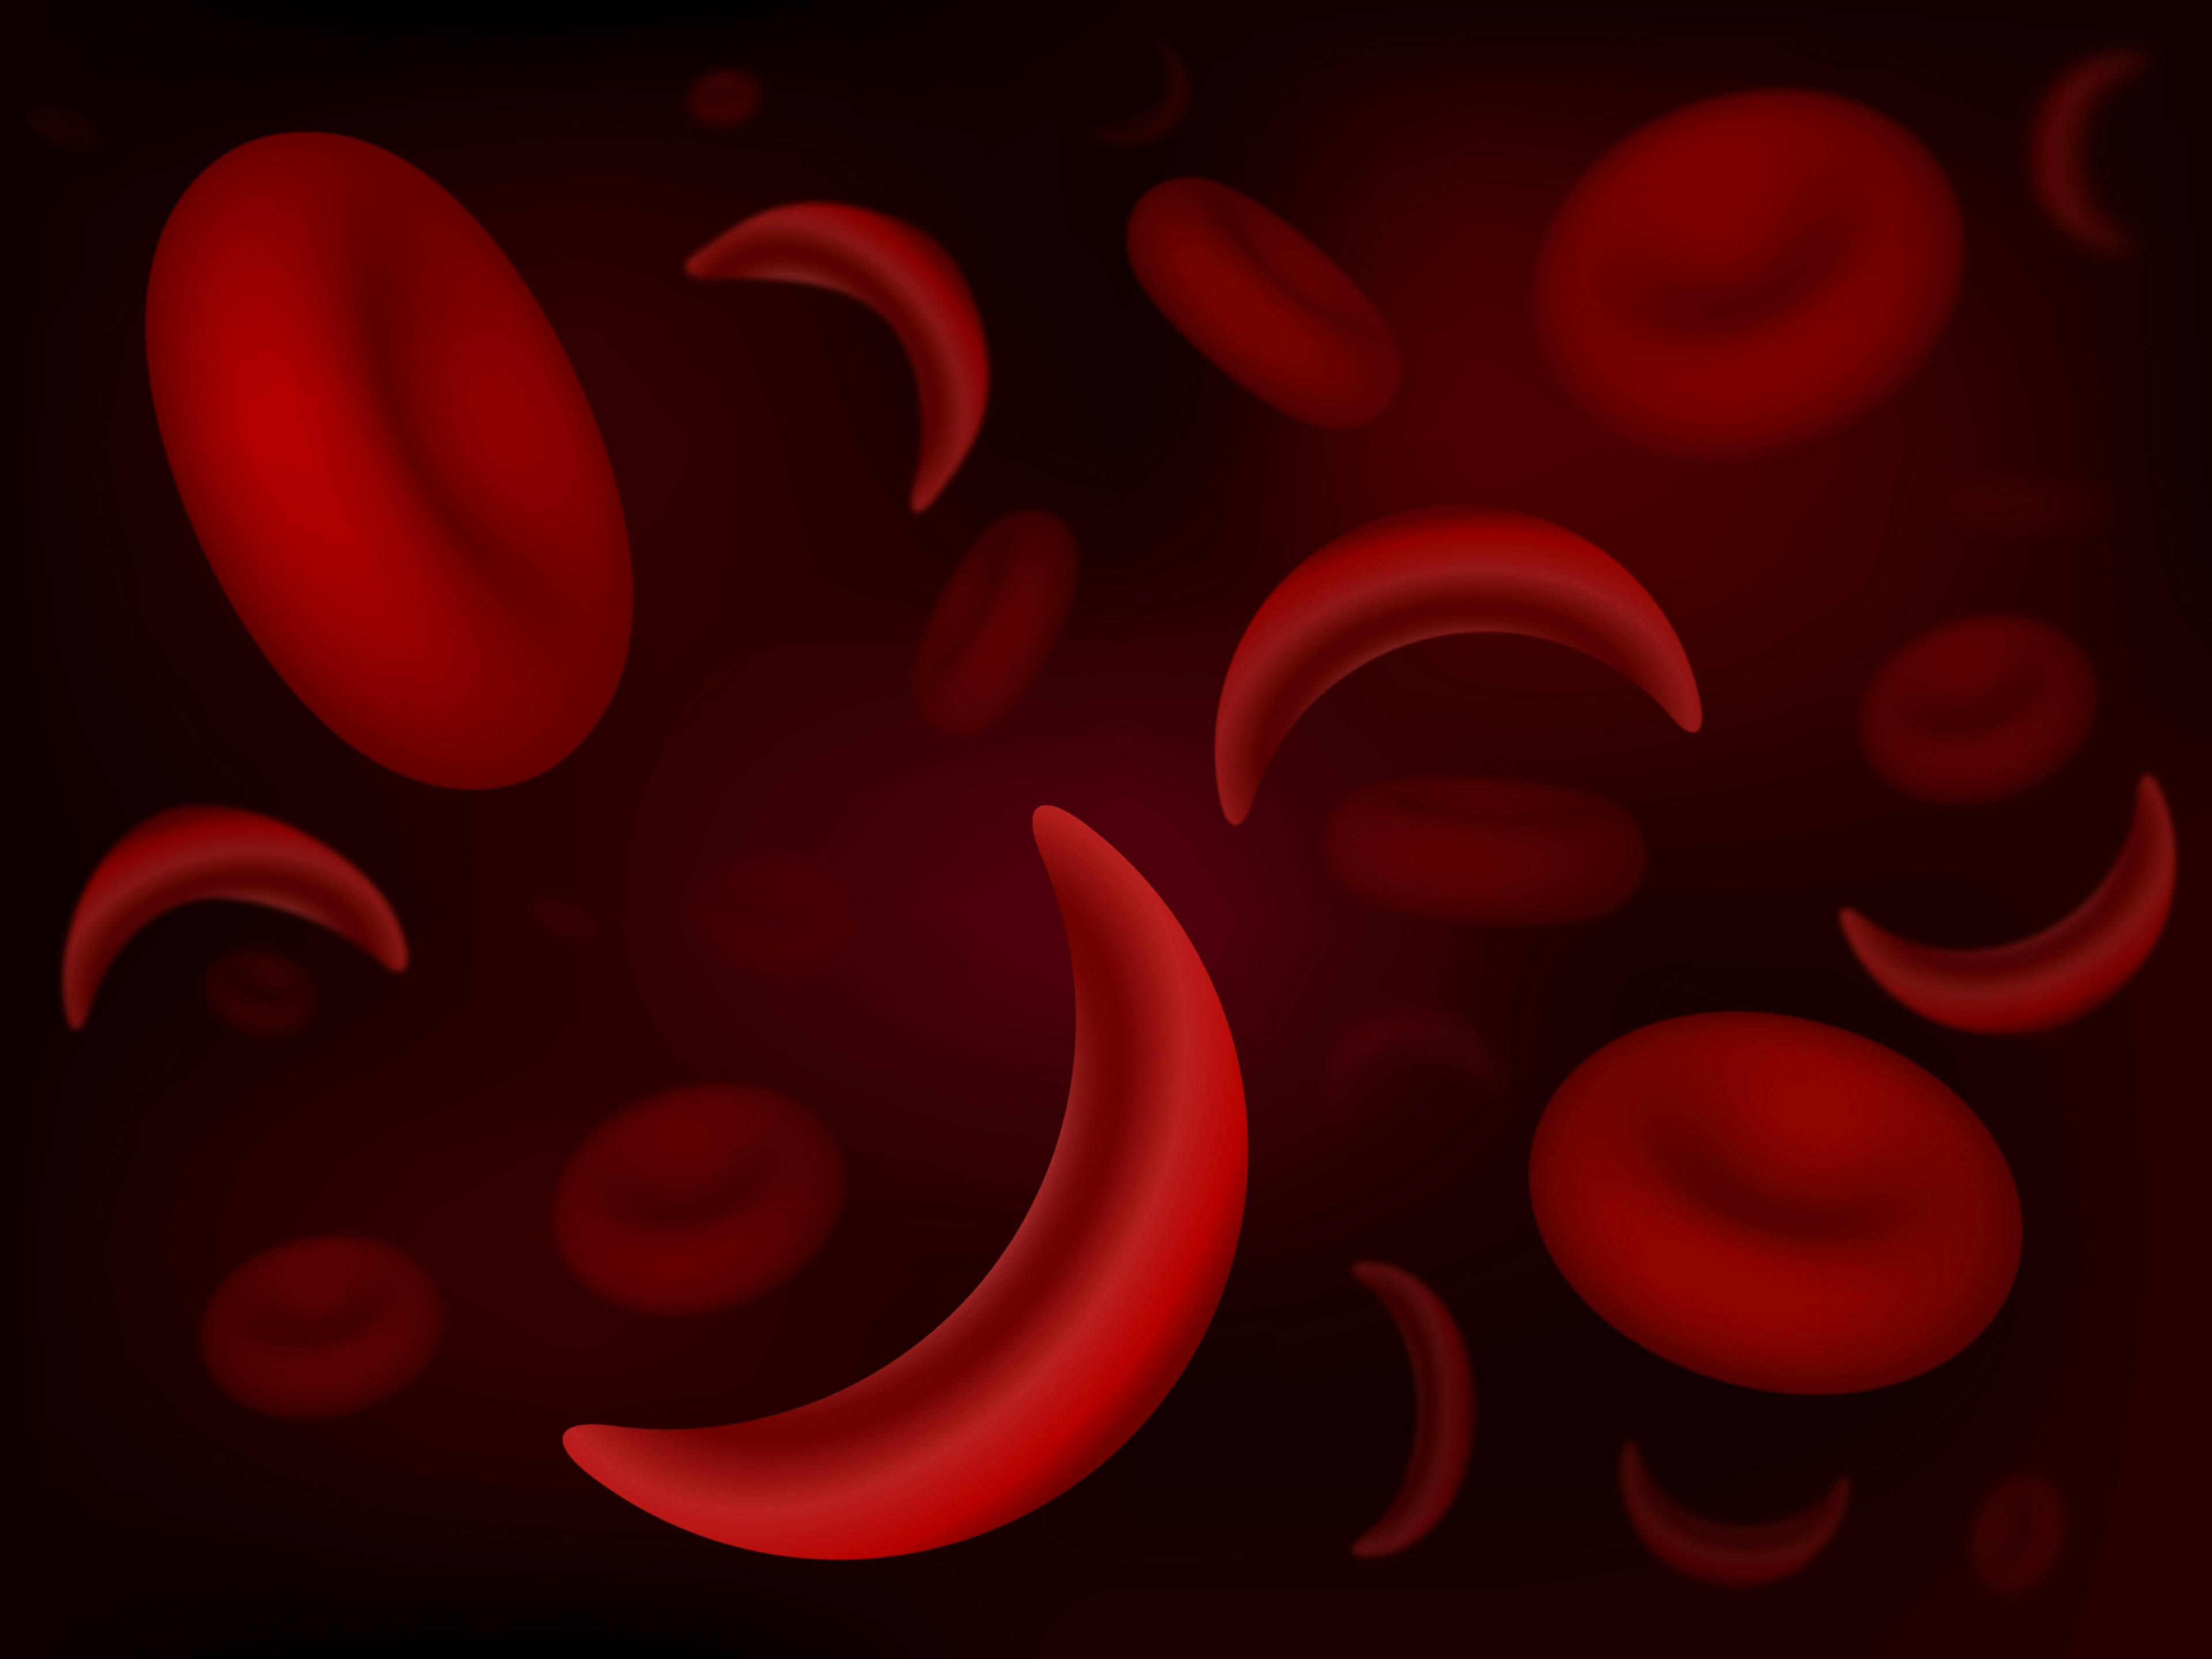 Sickle Cell Disease Cell Therapy Clinical Trial Enrolls First Patient 